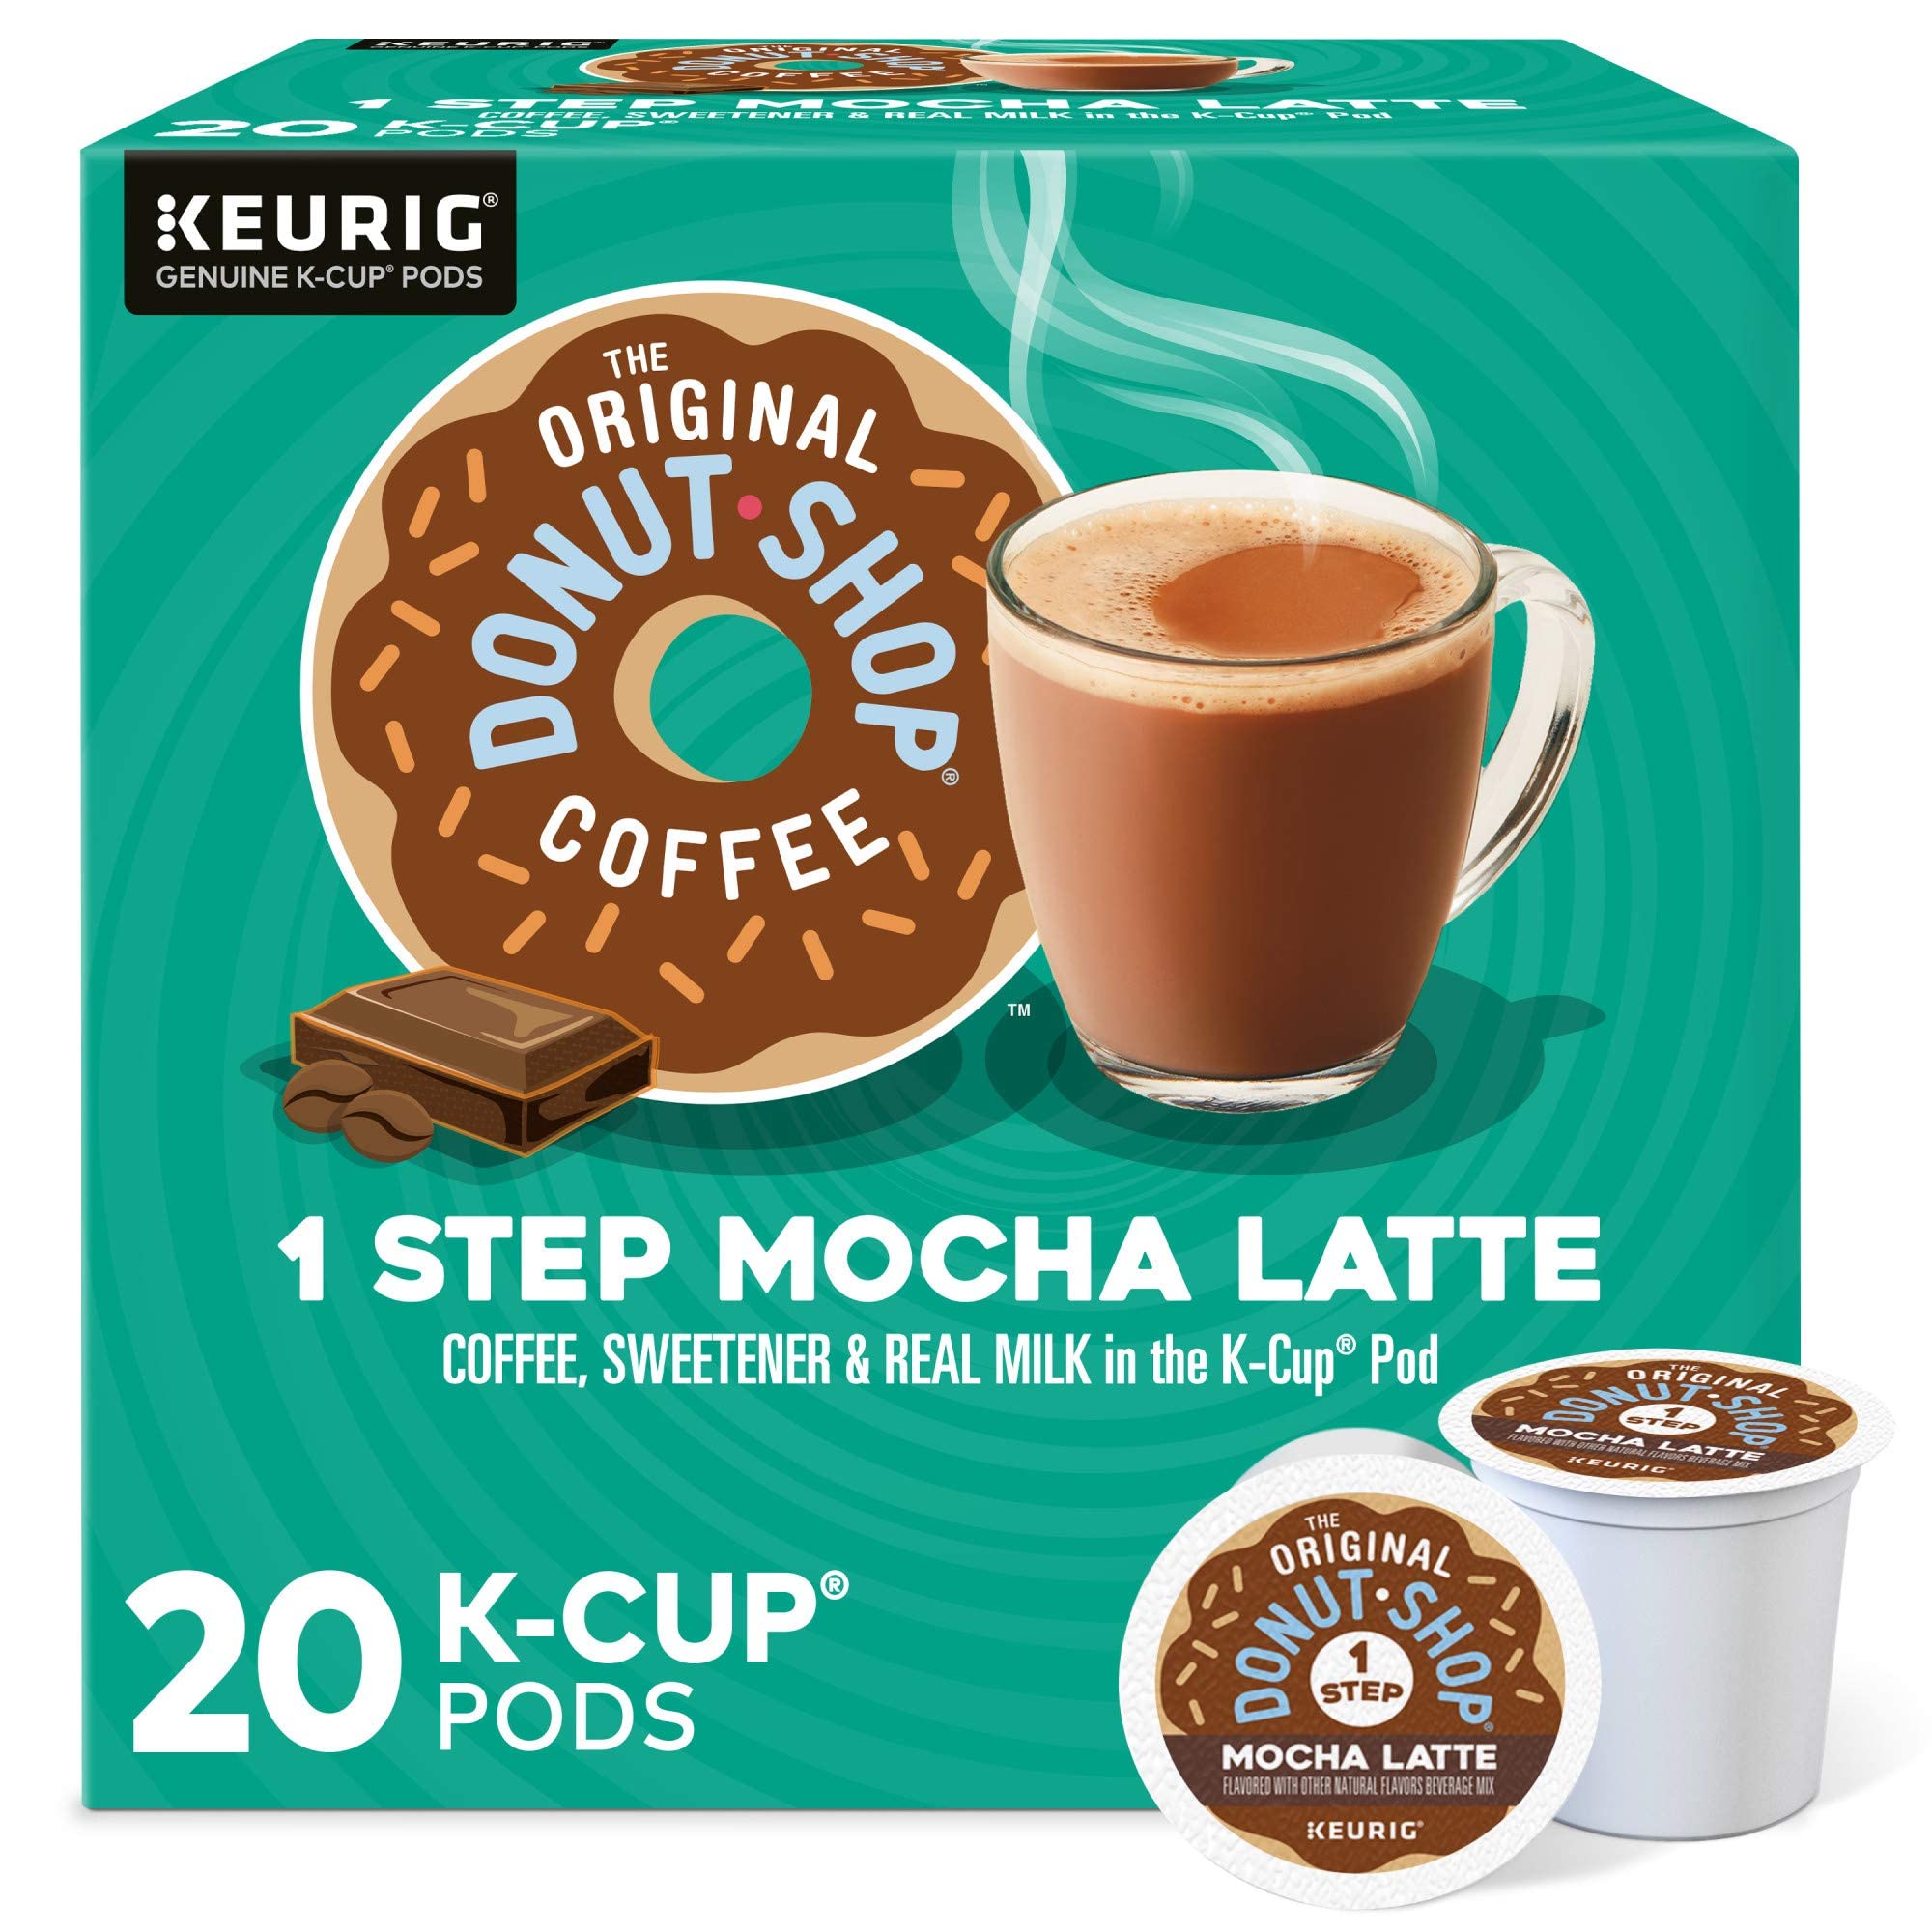 The Original Donut Shop Mocha Latte, Single-Serve Keurig K-Cup Pods, Flavored Coffee Pods, 20 Count [Subscribe & Save] $9.49 @ Amazon